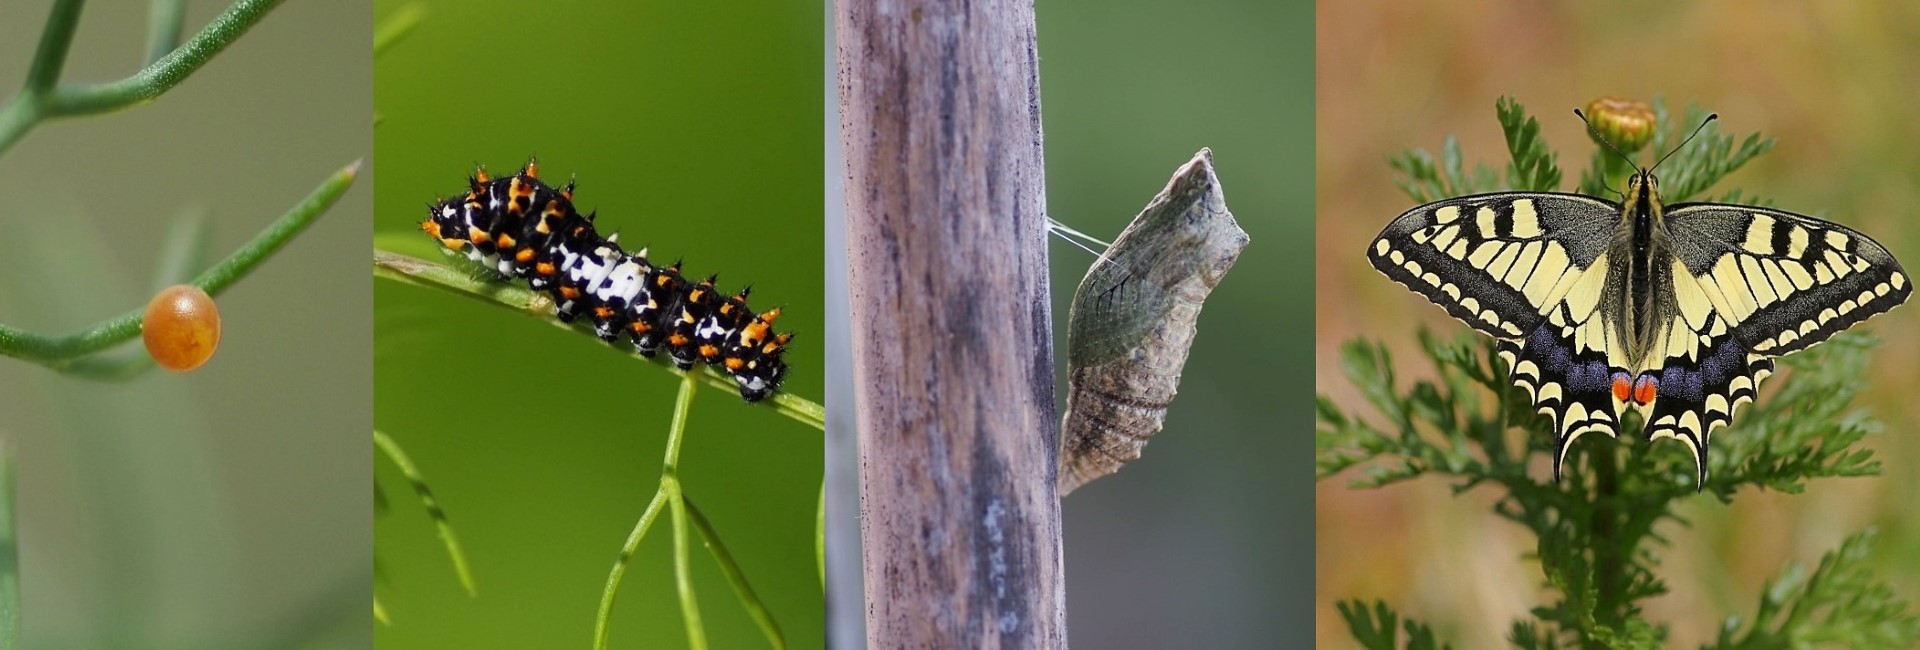 Life cycle of a butterfly - photos © Antonia Aga